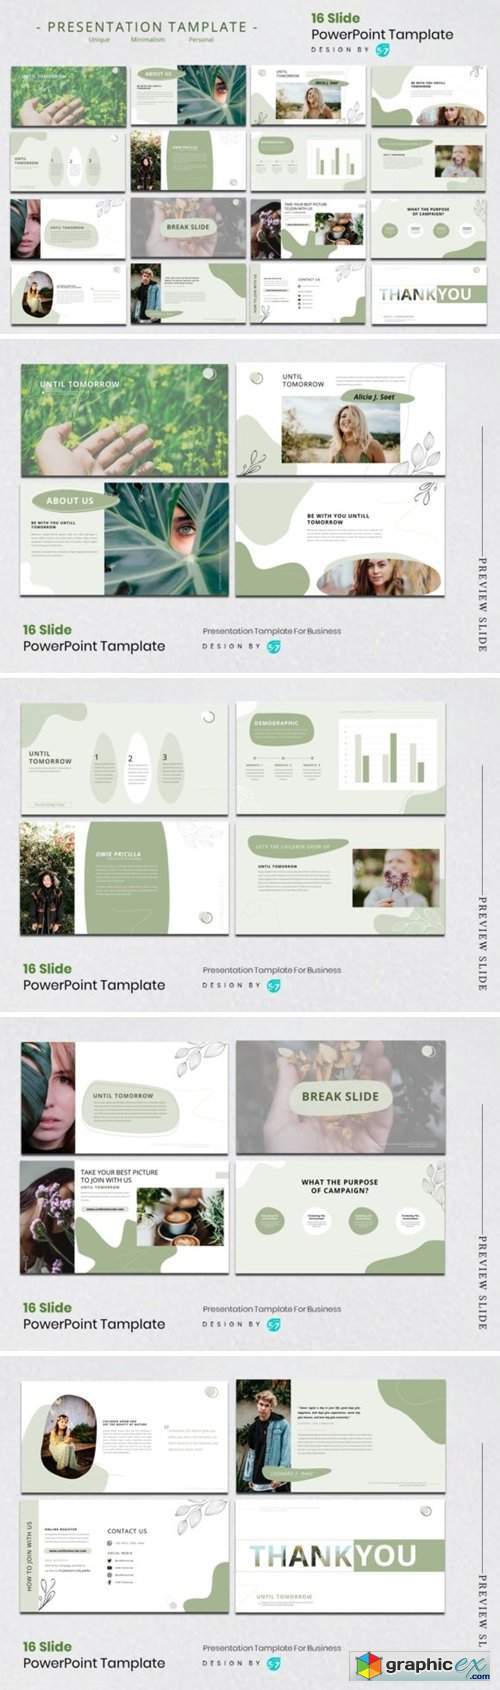 Presentation Tamplate - Green Themes